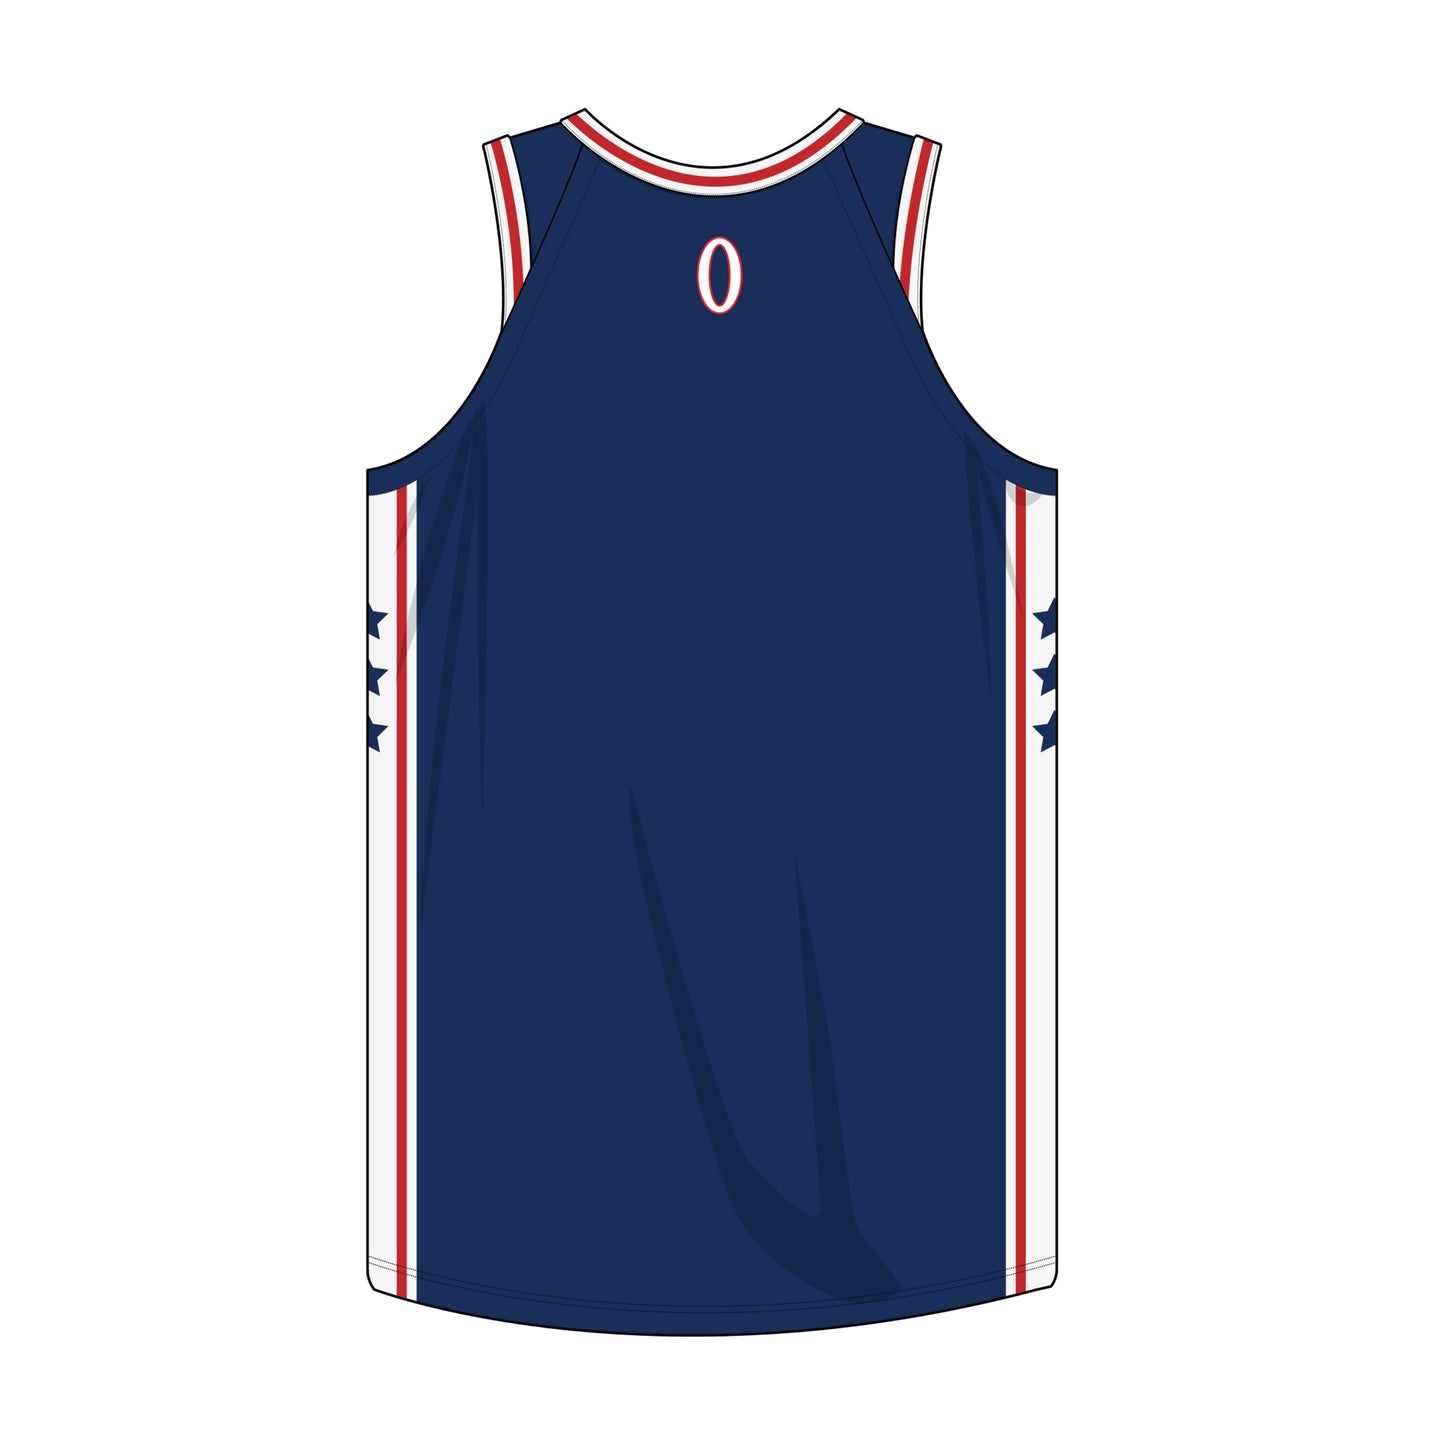 Olympia Basketball Jersey Blue, White and Red